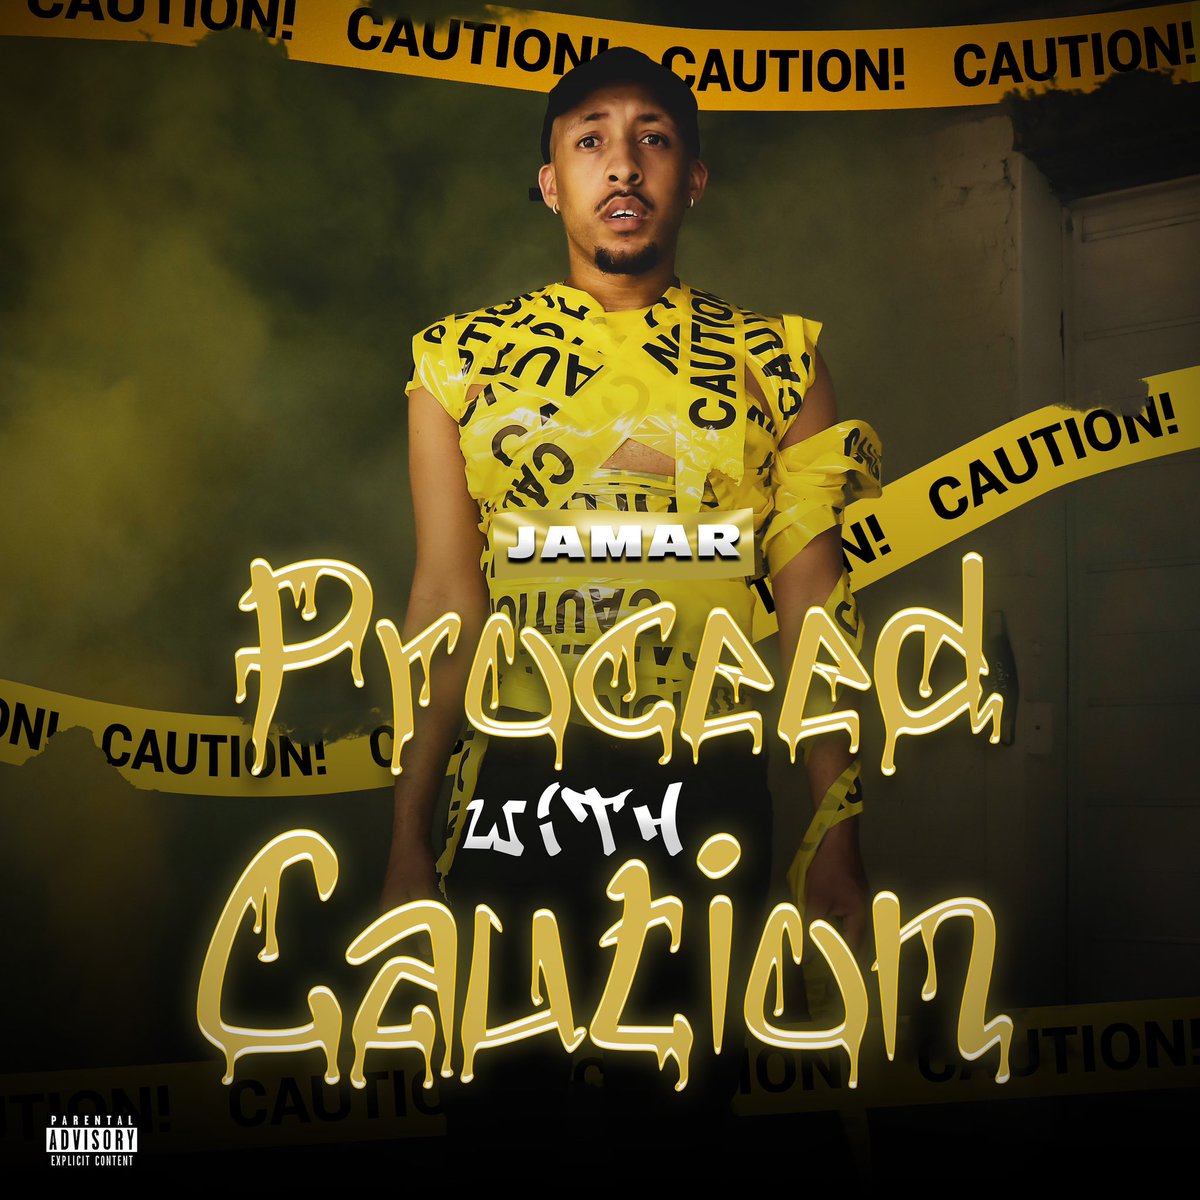 Proceed With Caution EP - 6.30.23
•
#proceedwithcaution #ep #newproject #coverart #music #newmusic #rnbmusic #rnbsinger #rnbartist #independentartist #hiphop #rnb #singer #songwriter #musician #spotify #itunes #applemusic #explore #explorepage #atlanta #rva